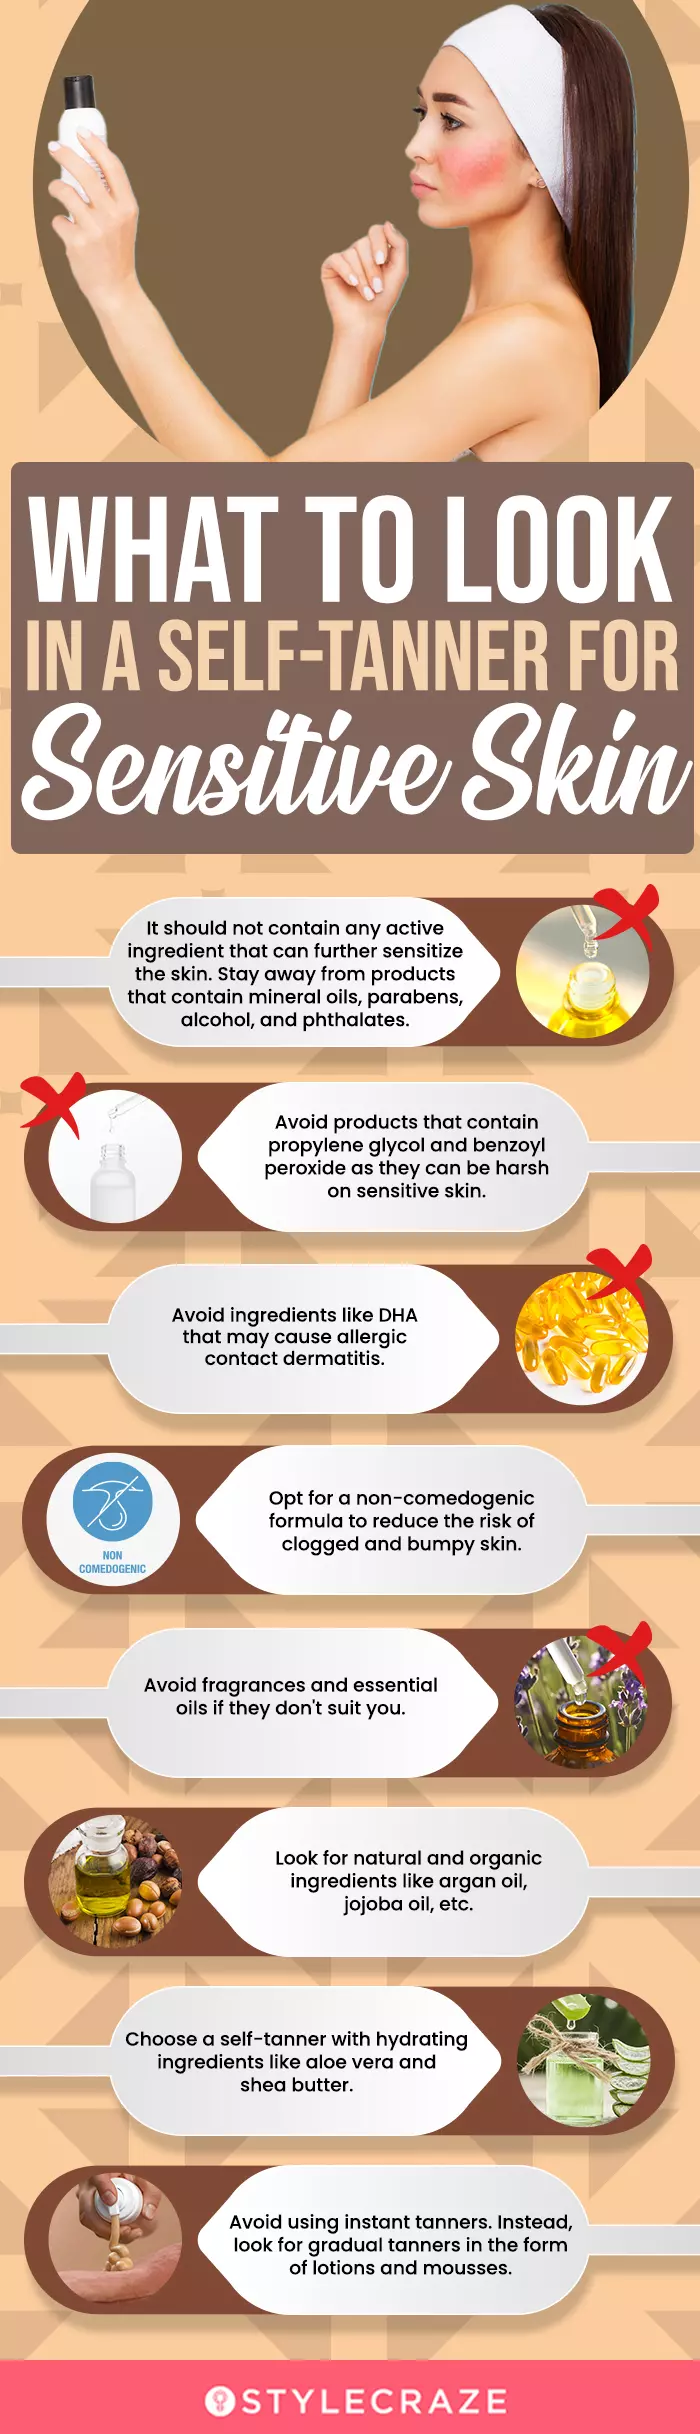 What To Look In a Self-Tanner For Sensitive Skin (infographic)